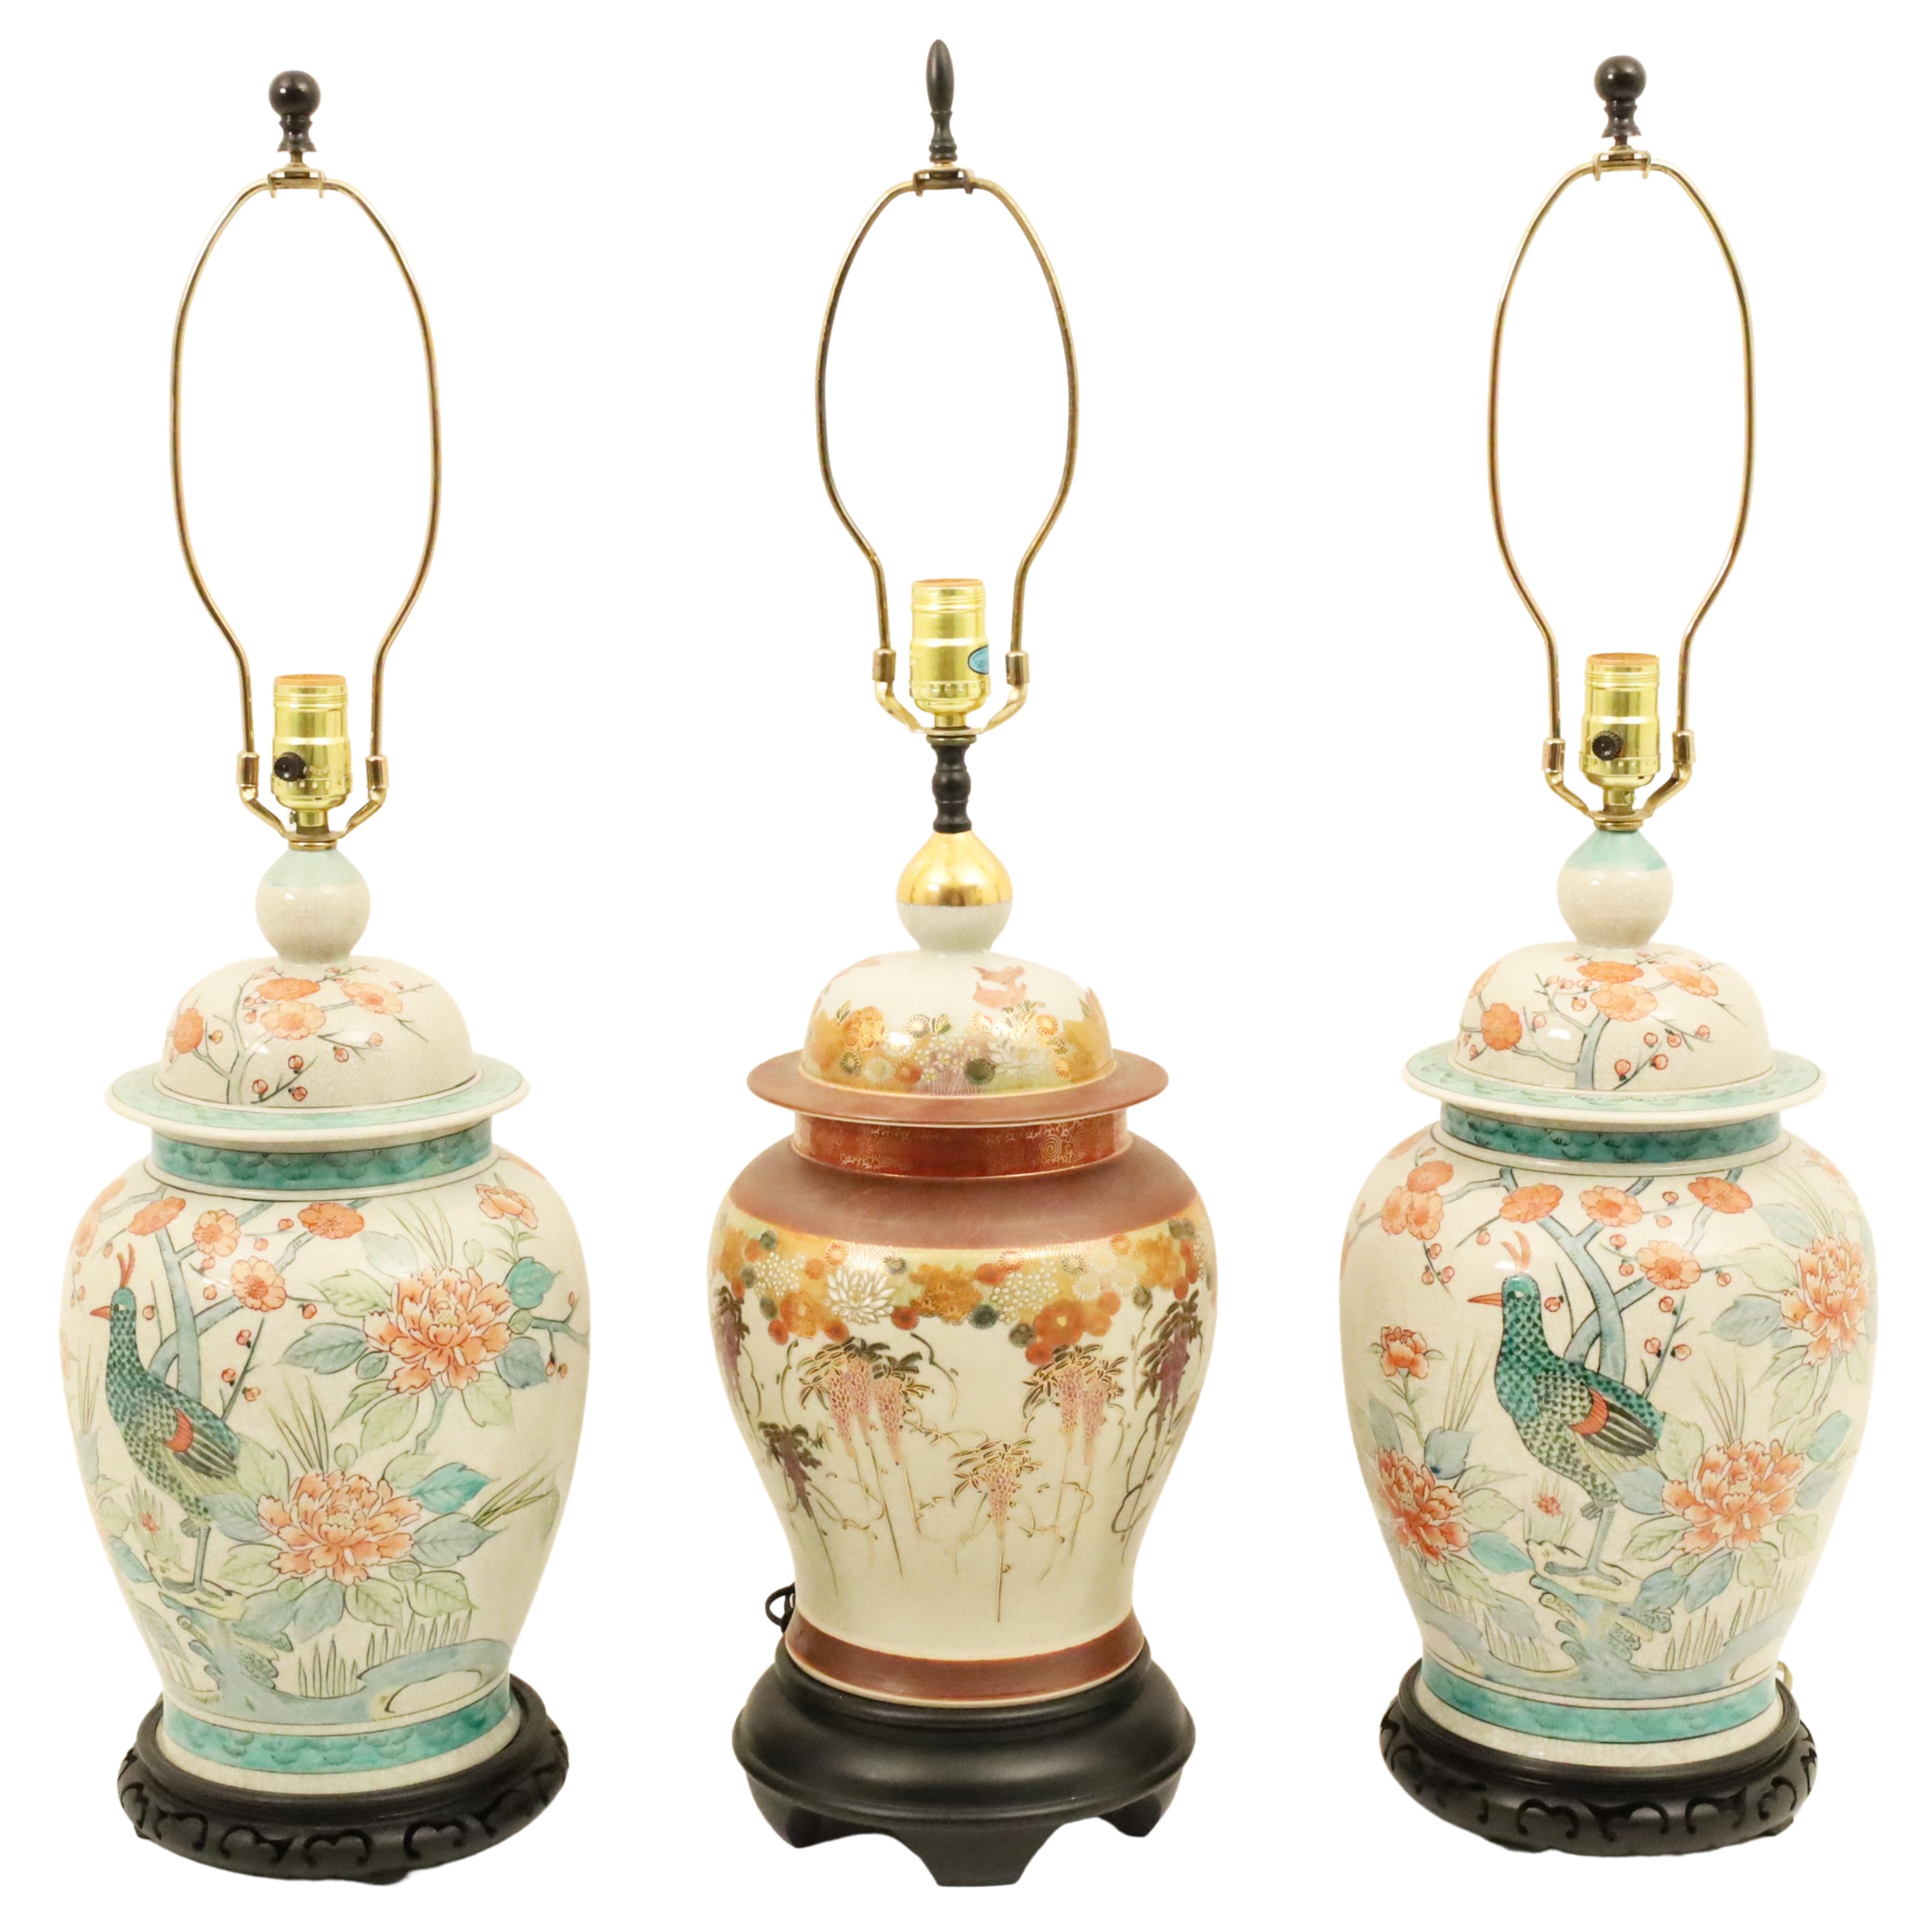 GROUP OF 3 ORIENTAL PORCELAIN LAMPS